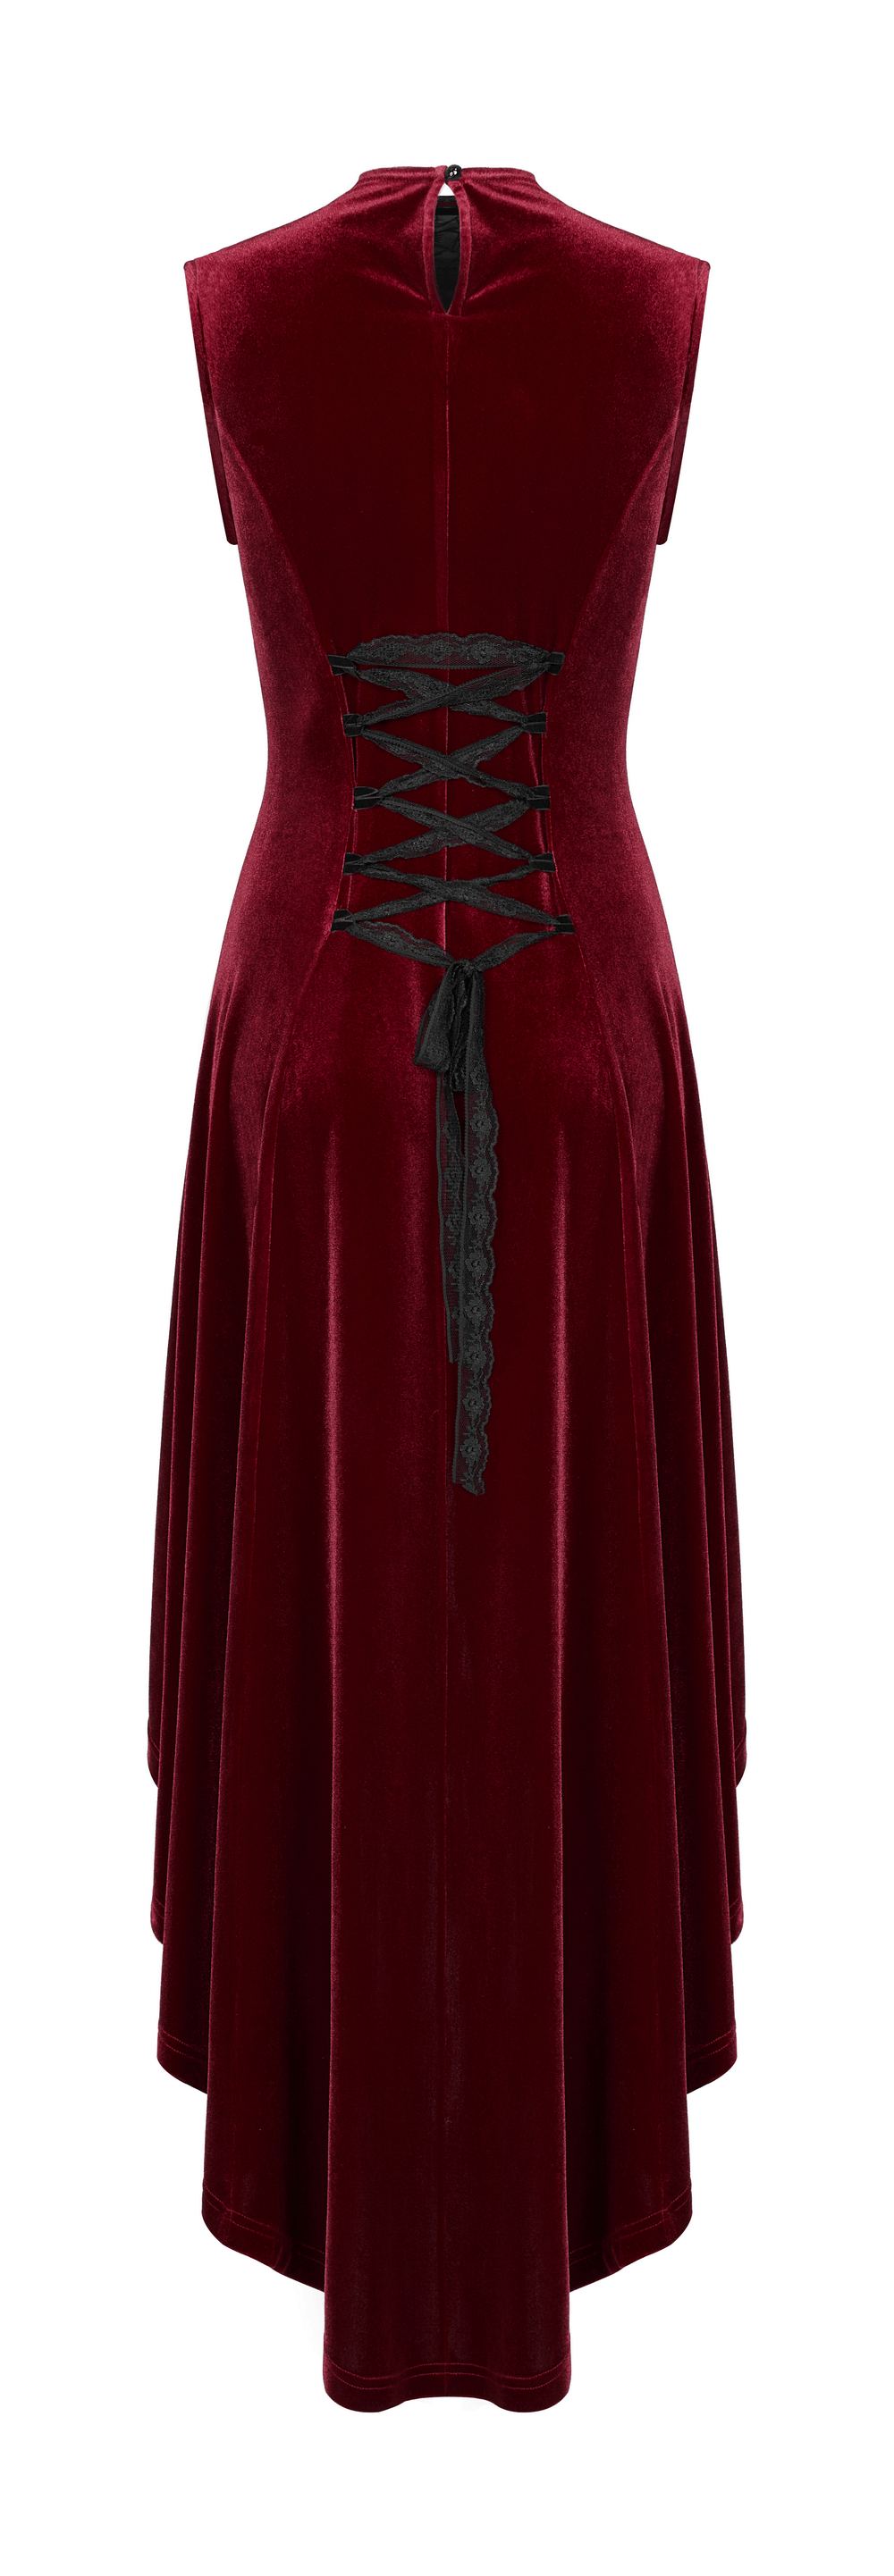 Vintage Style Red Velvet Dress With Lace Detail - HARD'N'HEAVY